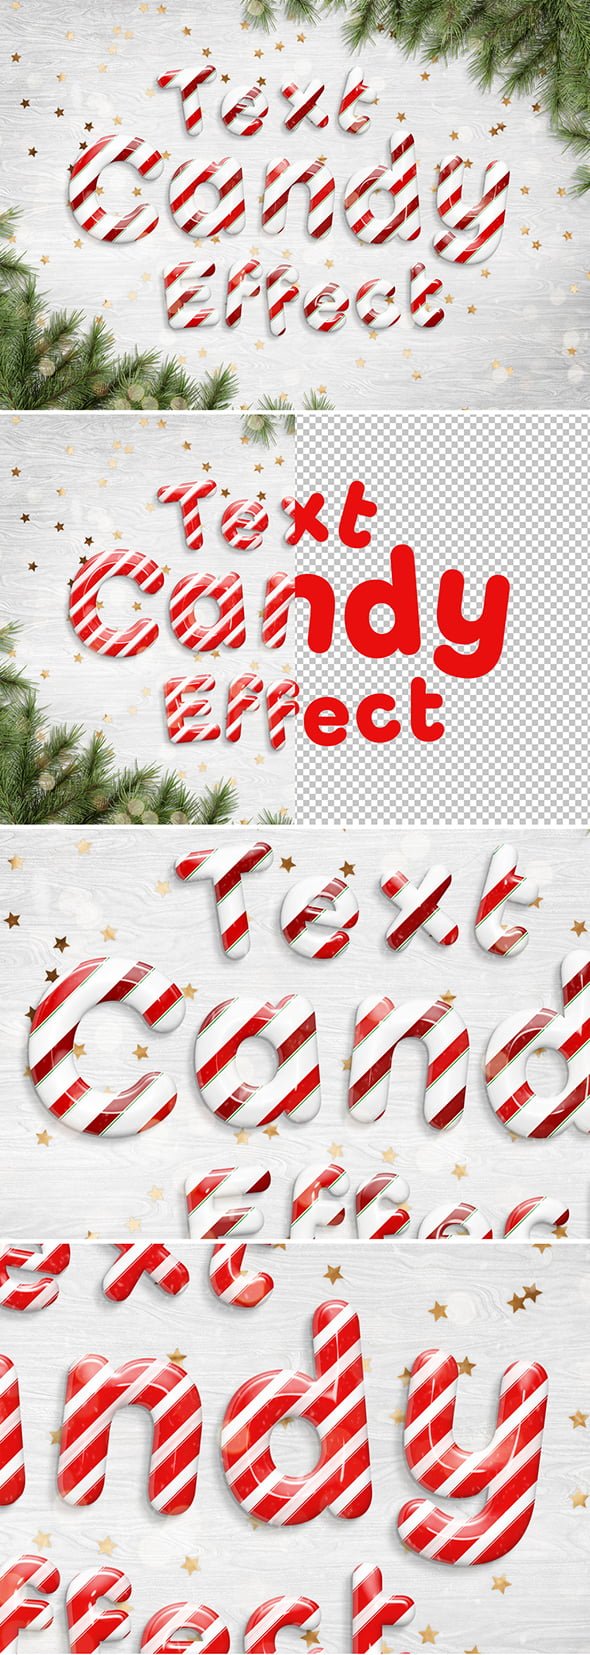 AdobeStock  -Candy Cane Text Effect Mockup - 296156696